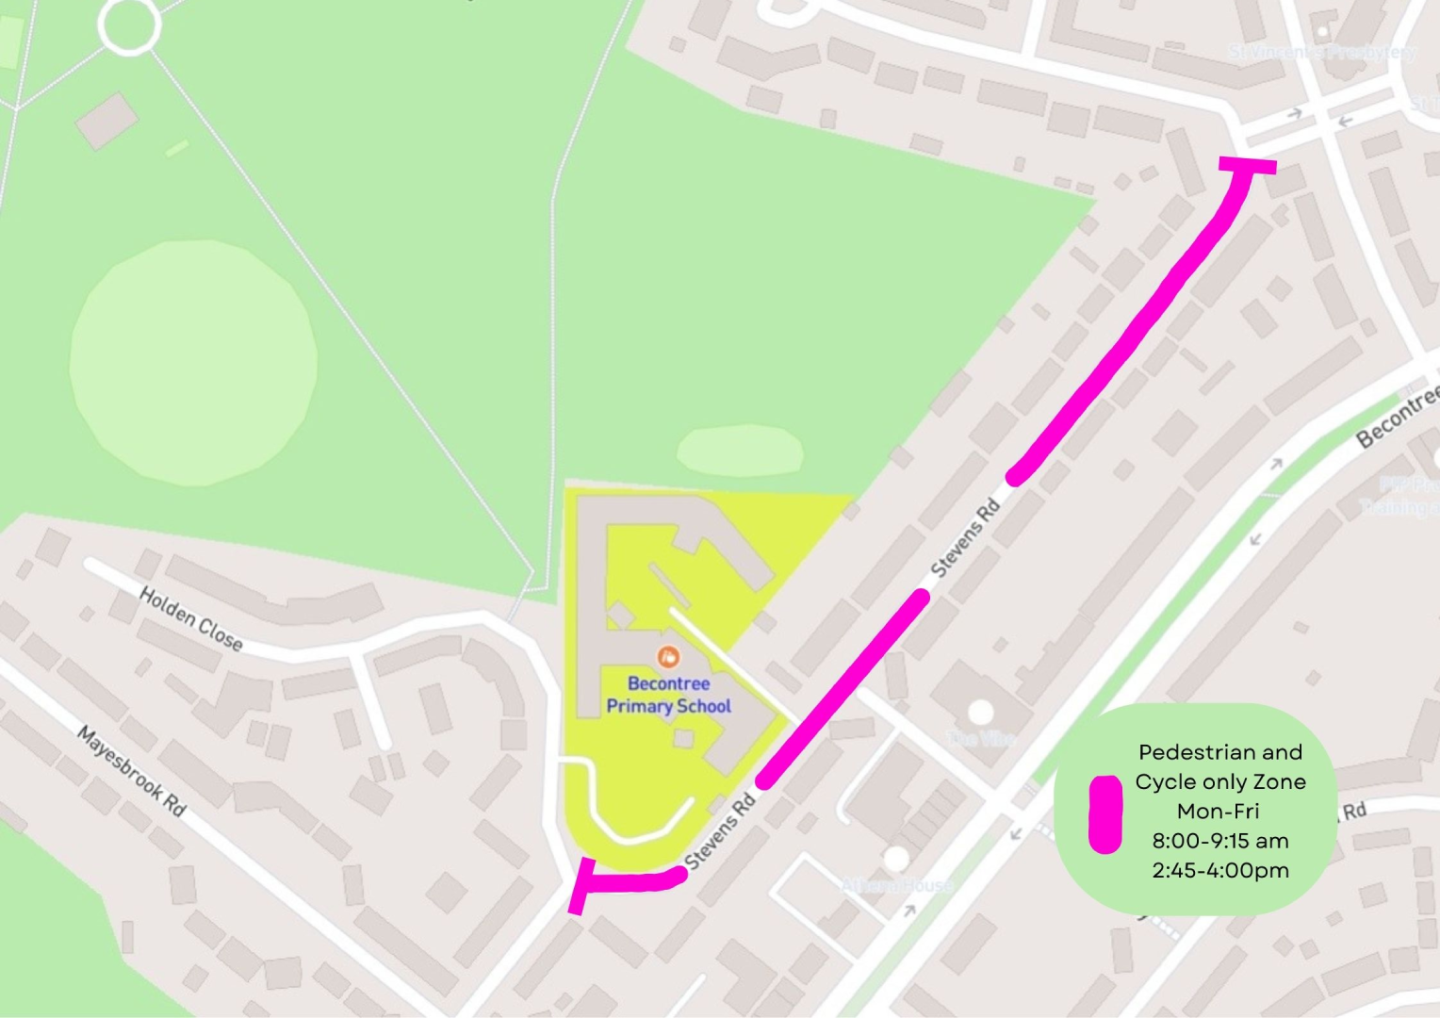 A map showing the location of the School Street for Becontree Primary School